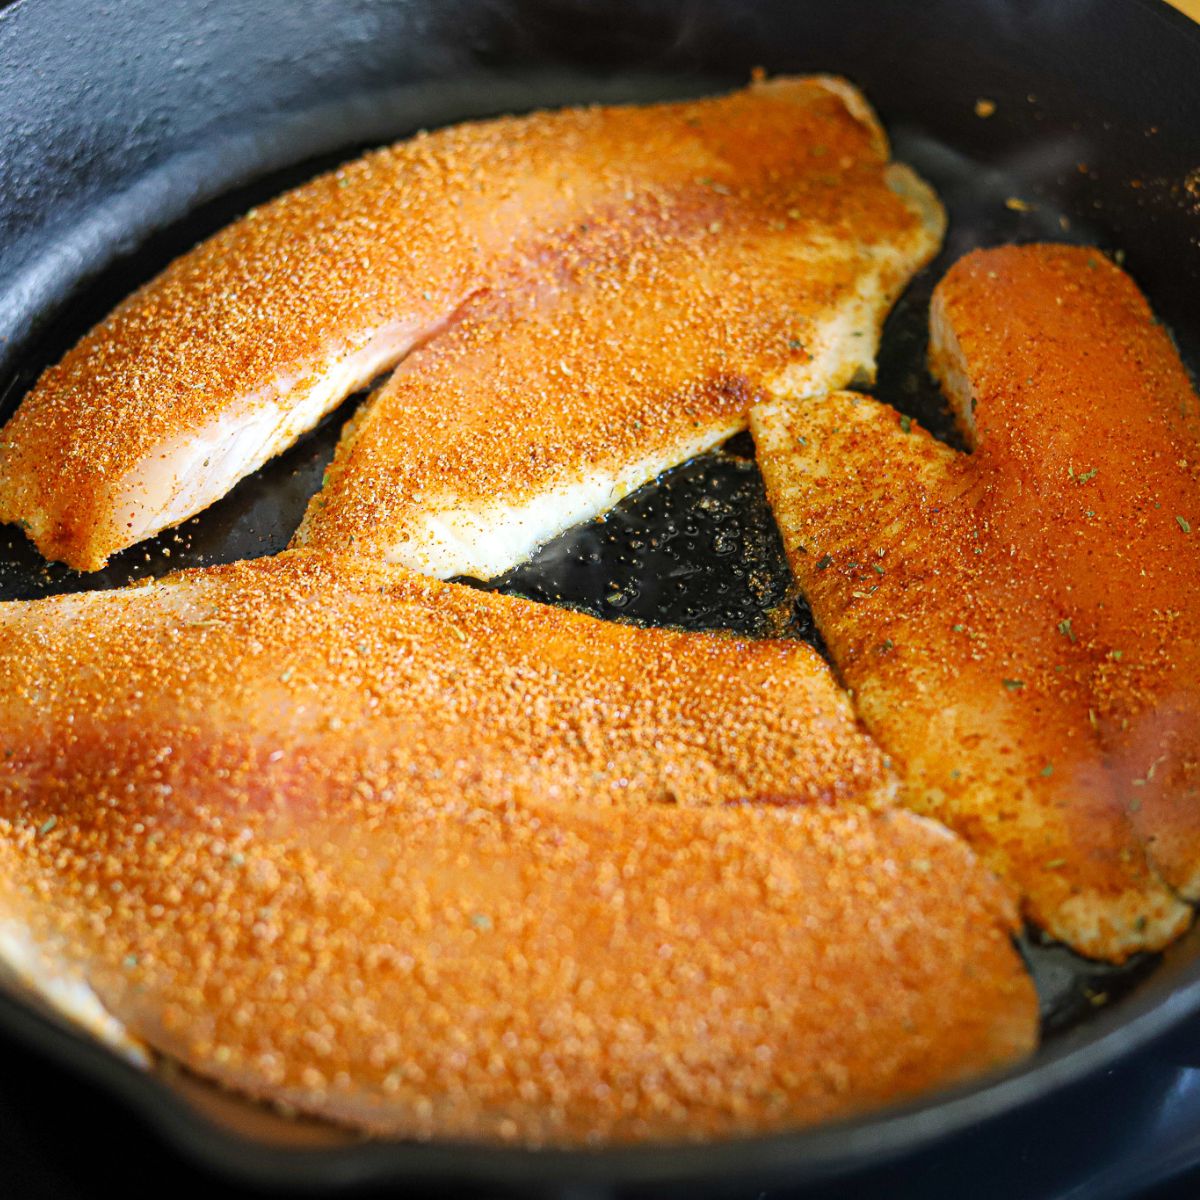 tilapia fillets seasoned with blackening seasoning, cooking in a cast iron skillet.